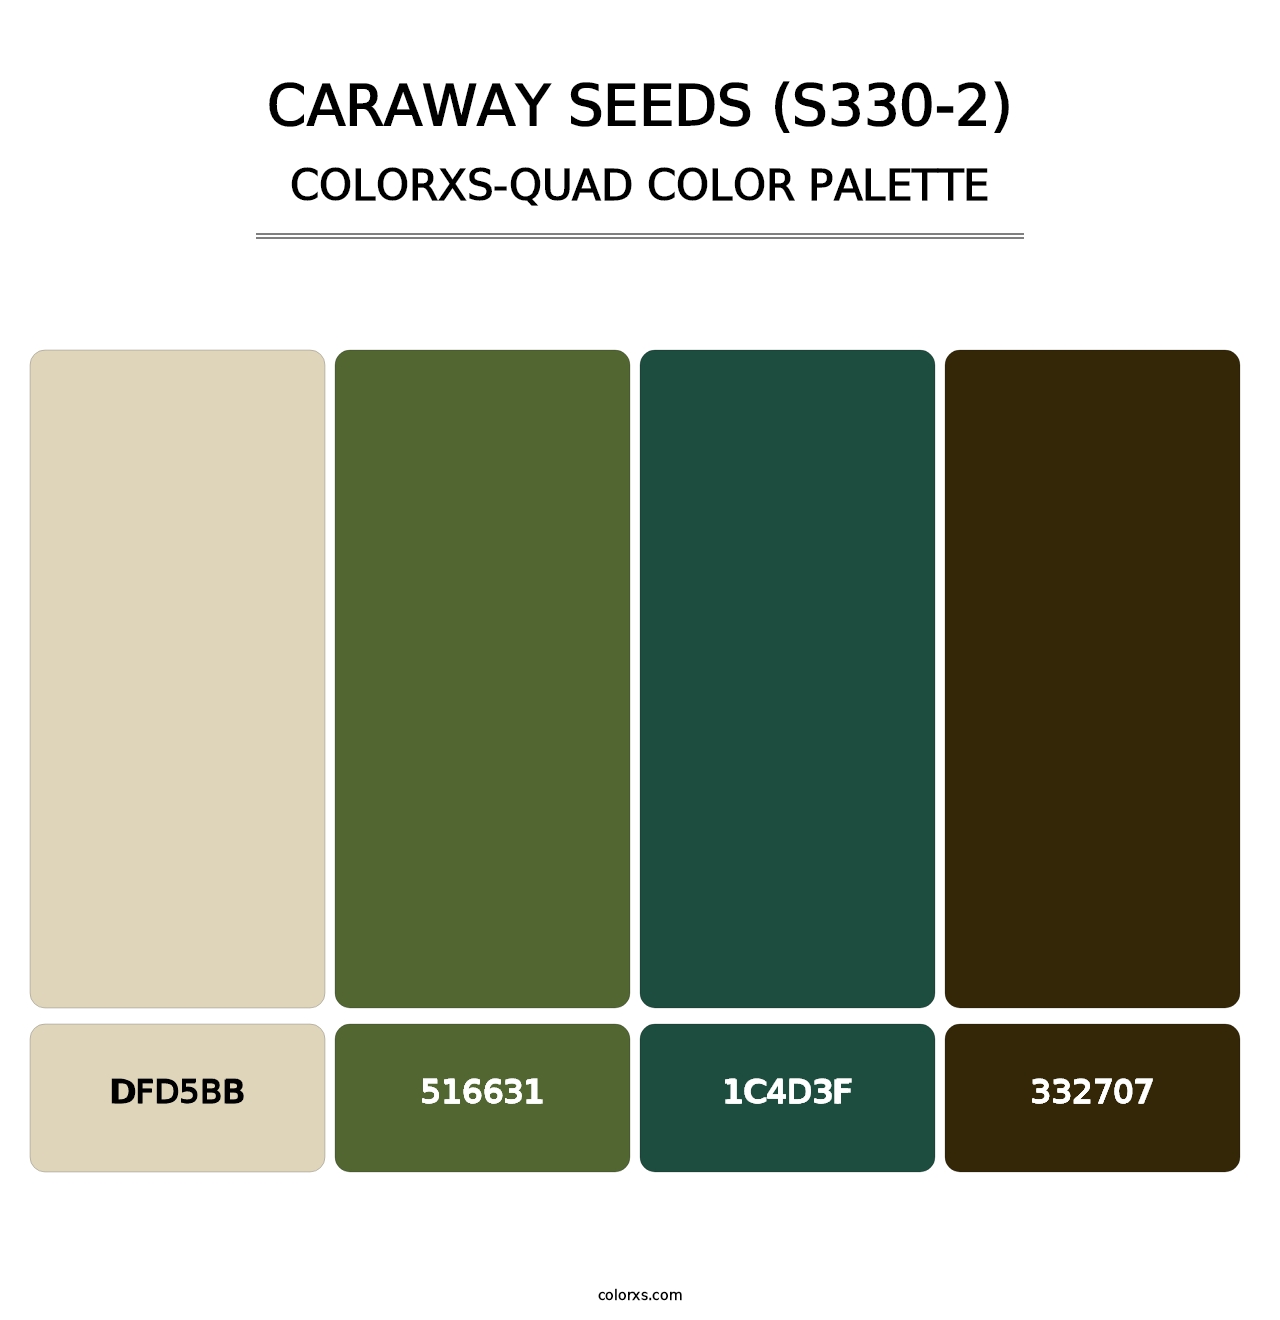 Caraway Seeds (S330-2) - Colorxs Quad Palette